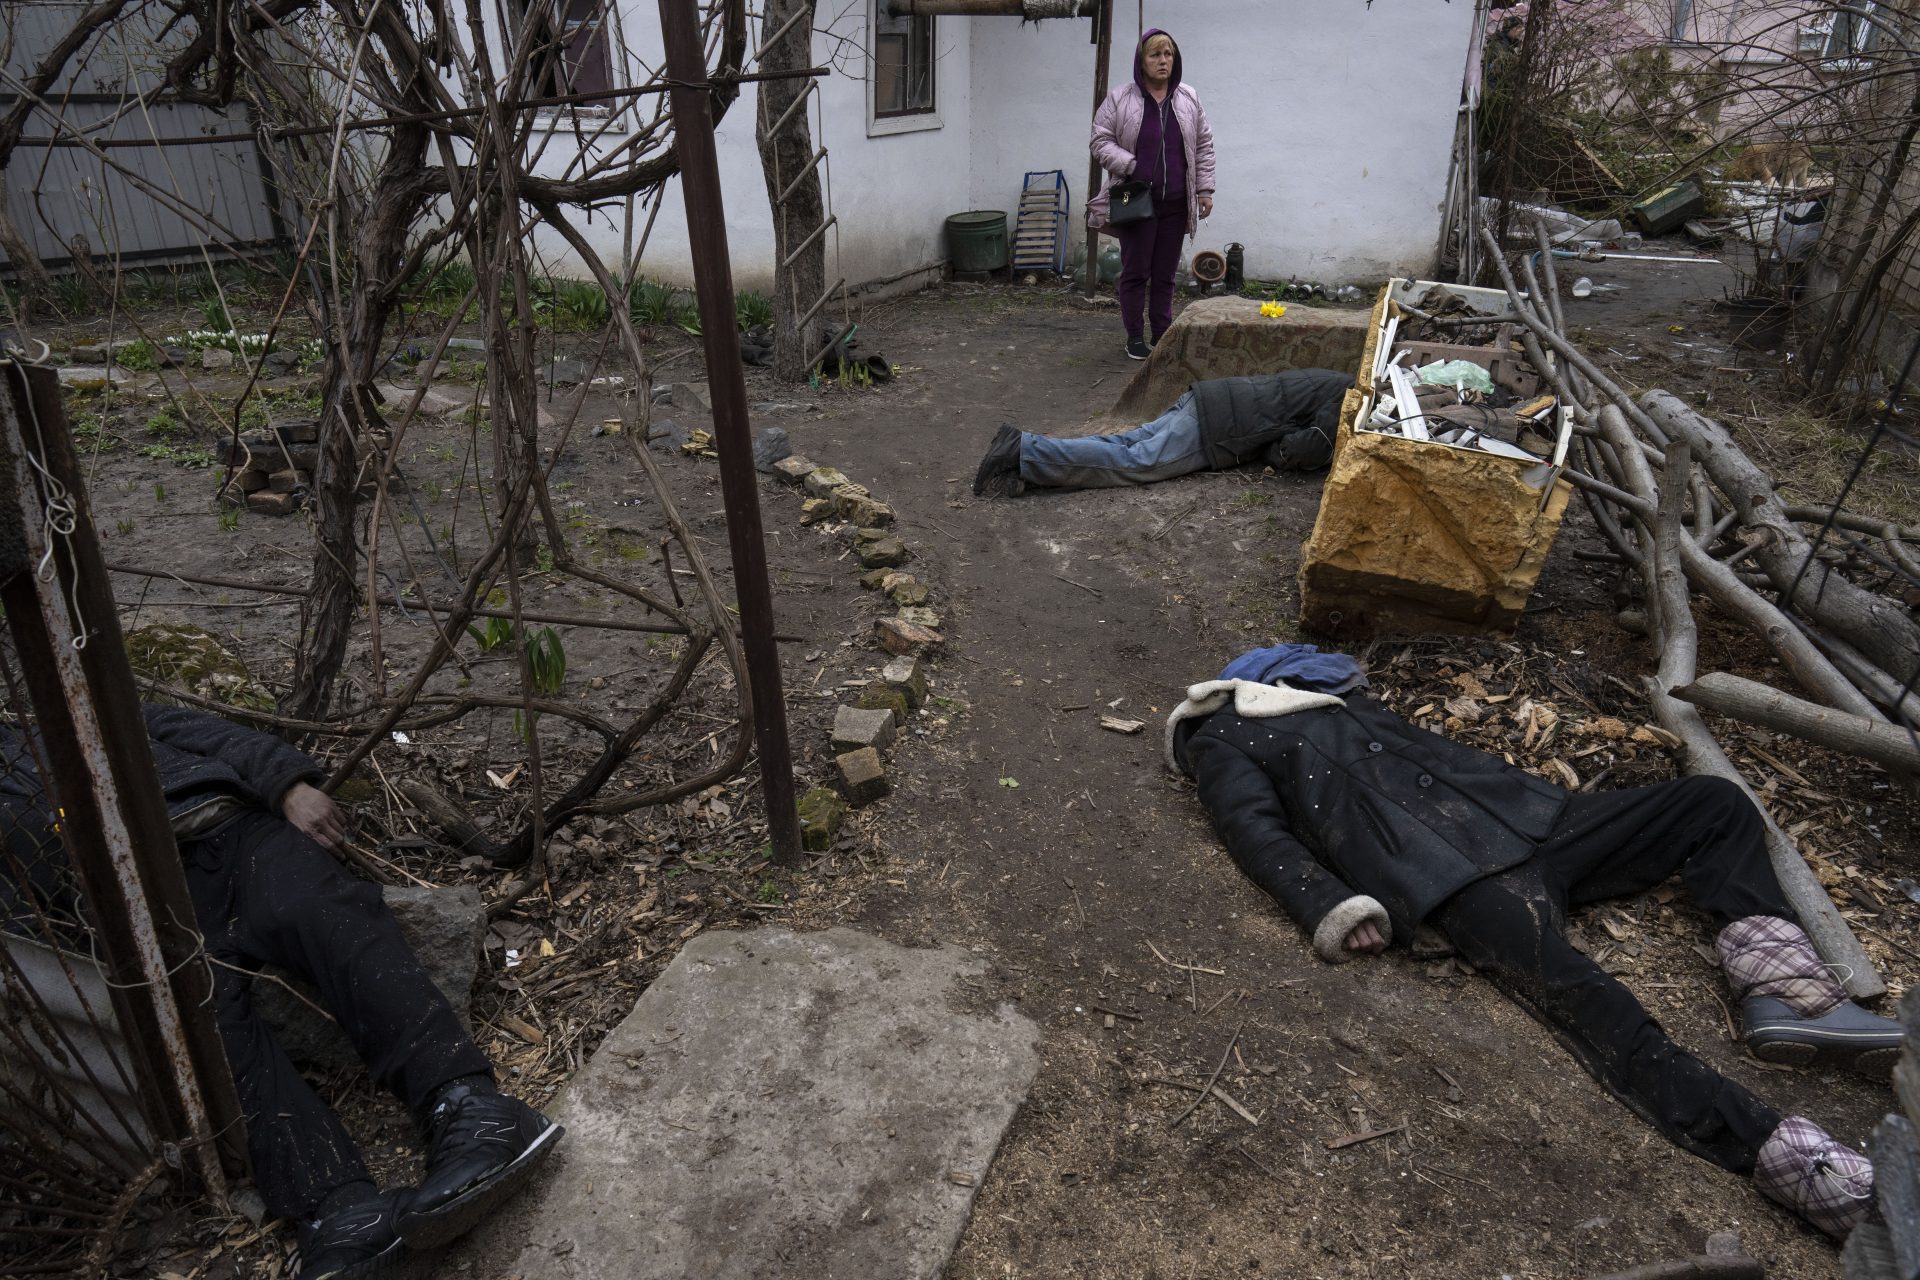 A woman stands next to three people killed in the courtyard of a house in Bucha, on the outskirts of Kyiv, Ukraine, Tuesday, April 5, 2022.